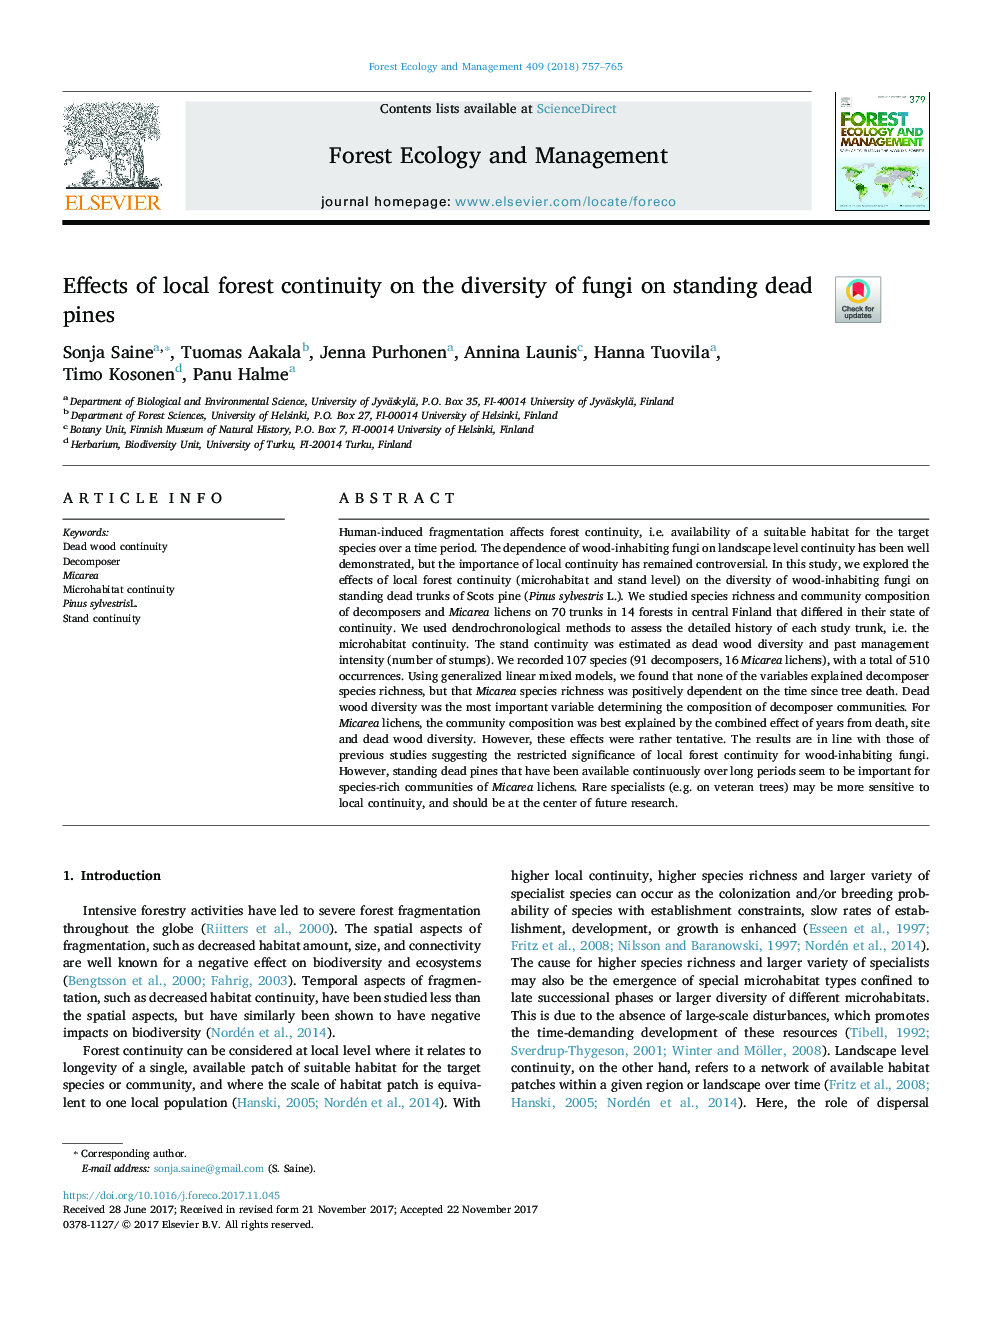 Effects of local forest continuity on the diversity of fungi on standing dead pines